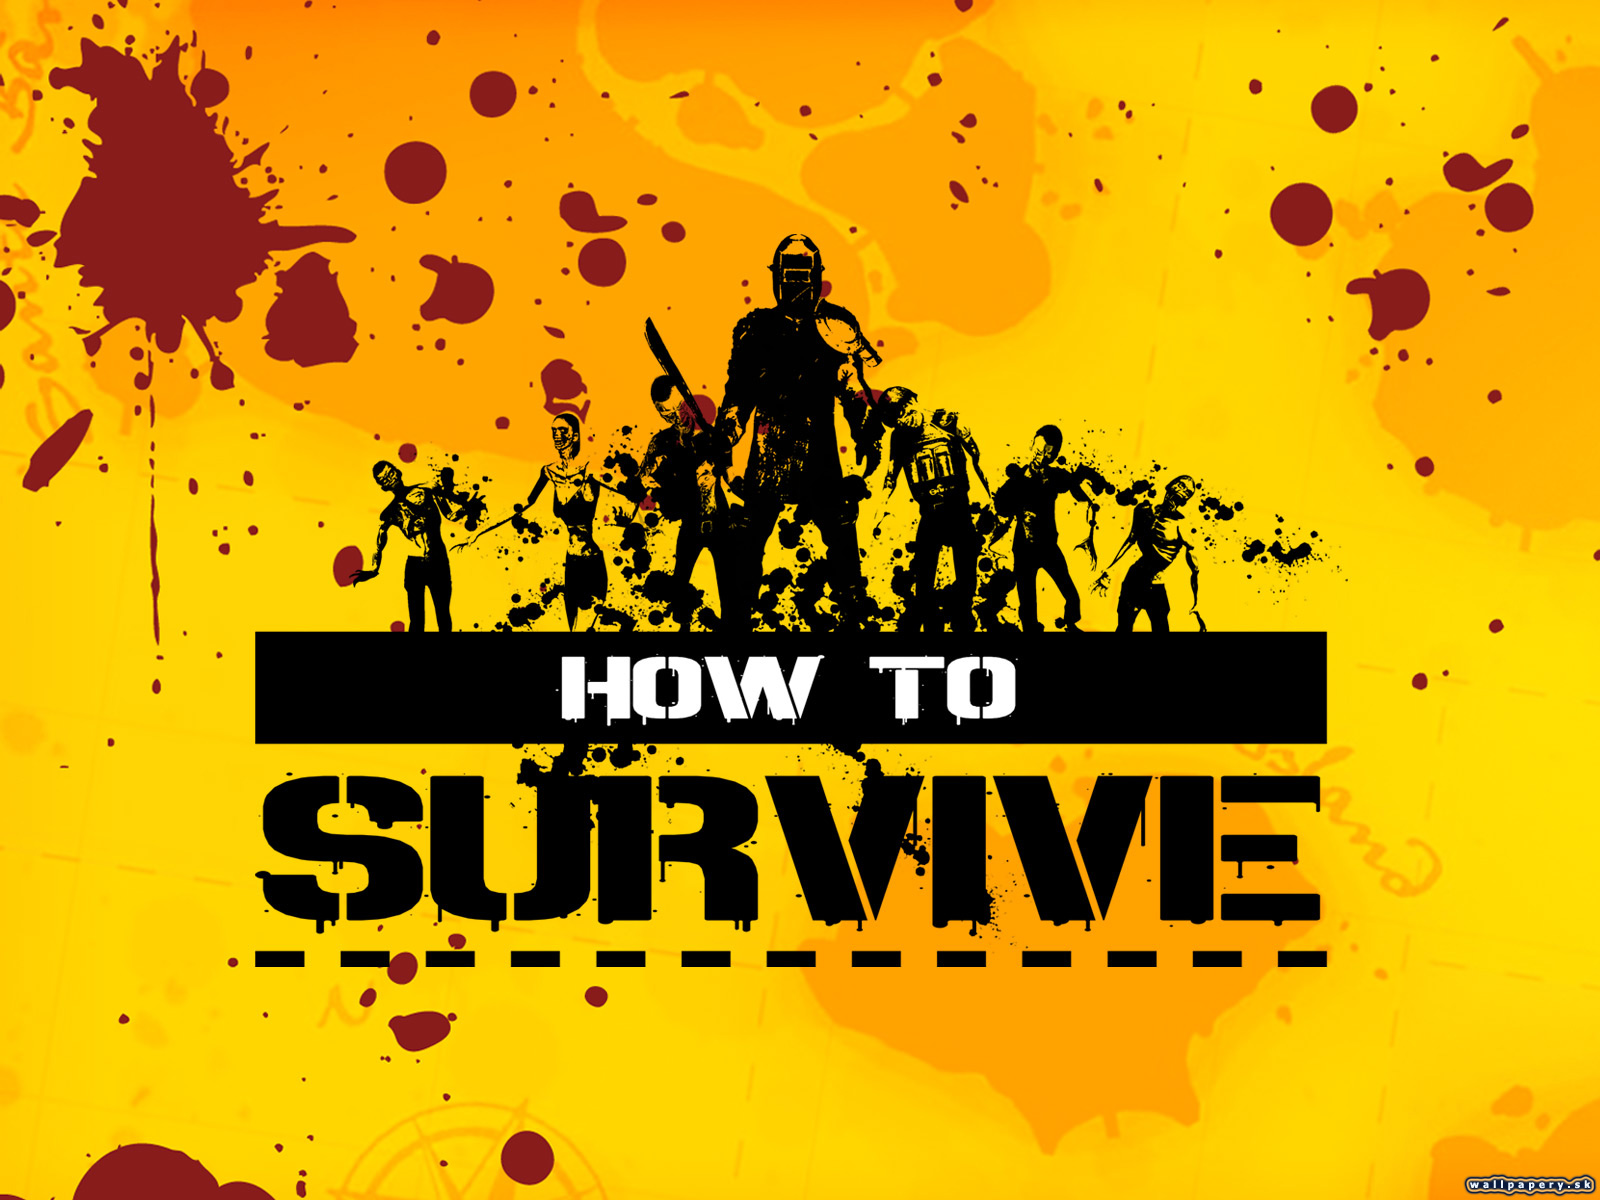 How to Survive - wallpaper 1